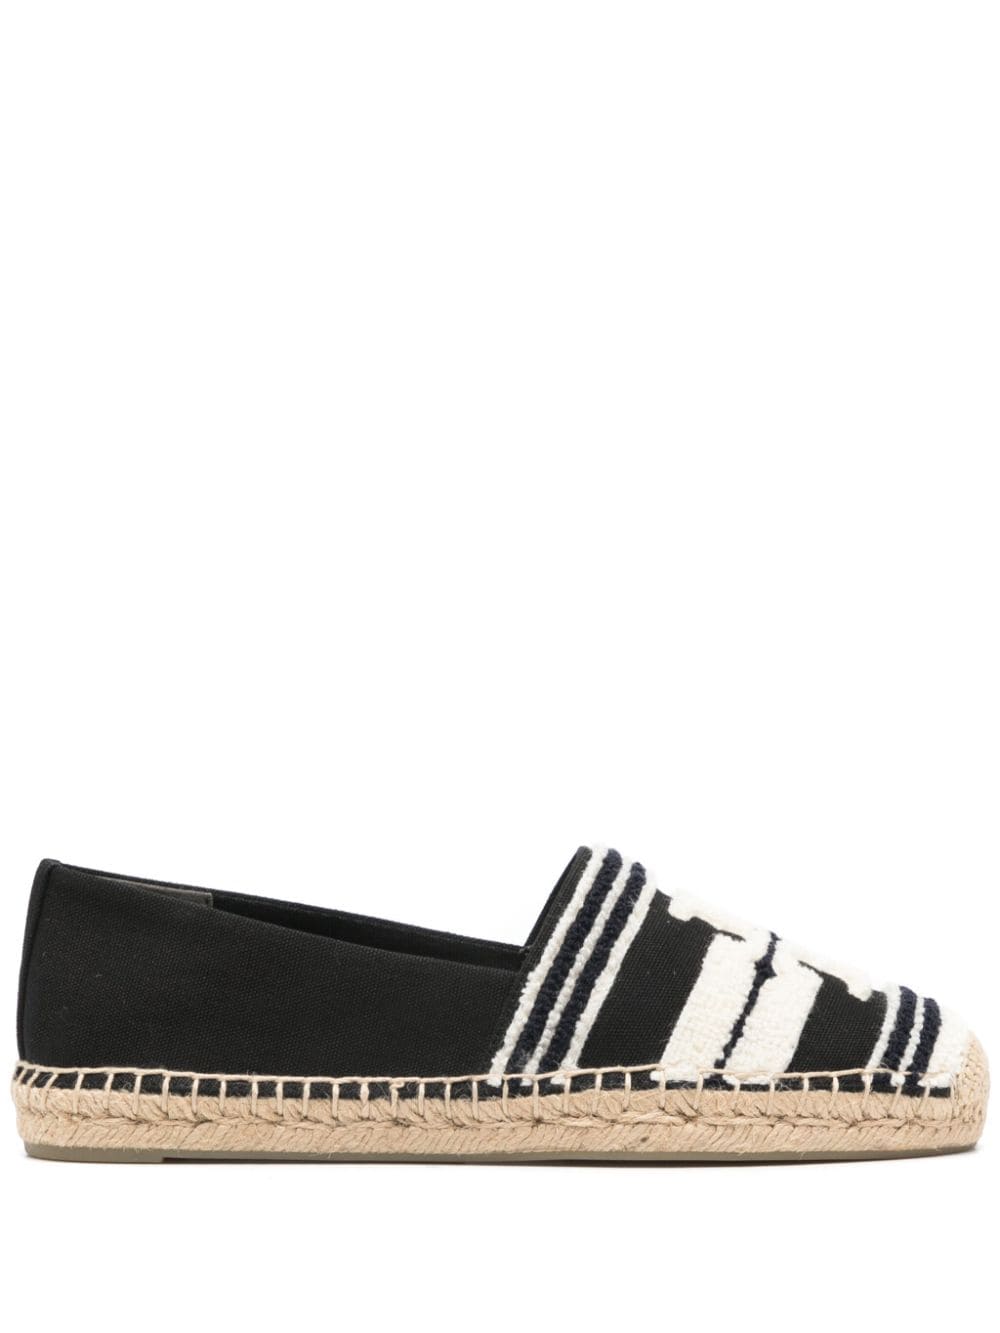 Tory Burch TORY BURCH- Double T Canvas Espadrilles